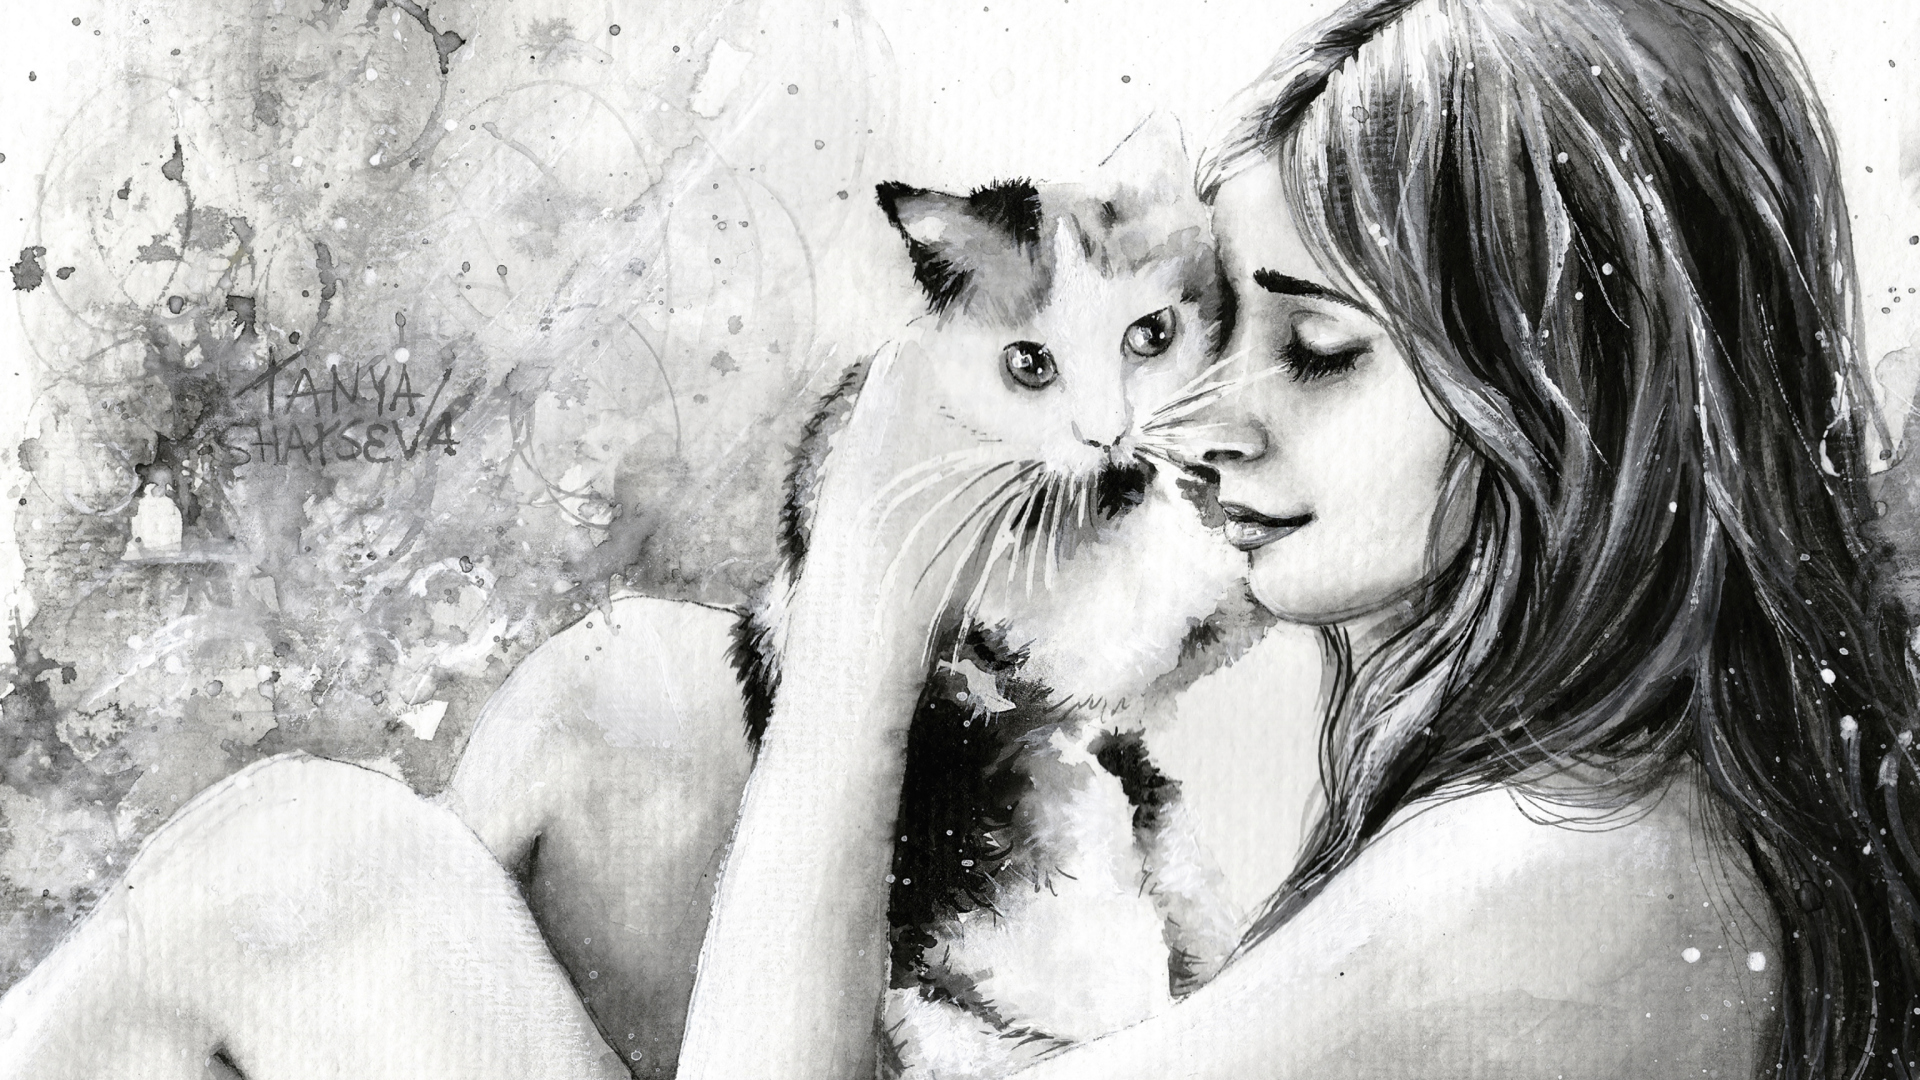 Girl With Cat Black And White Painting wallpaper 1920x1080